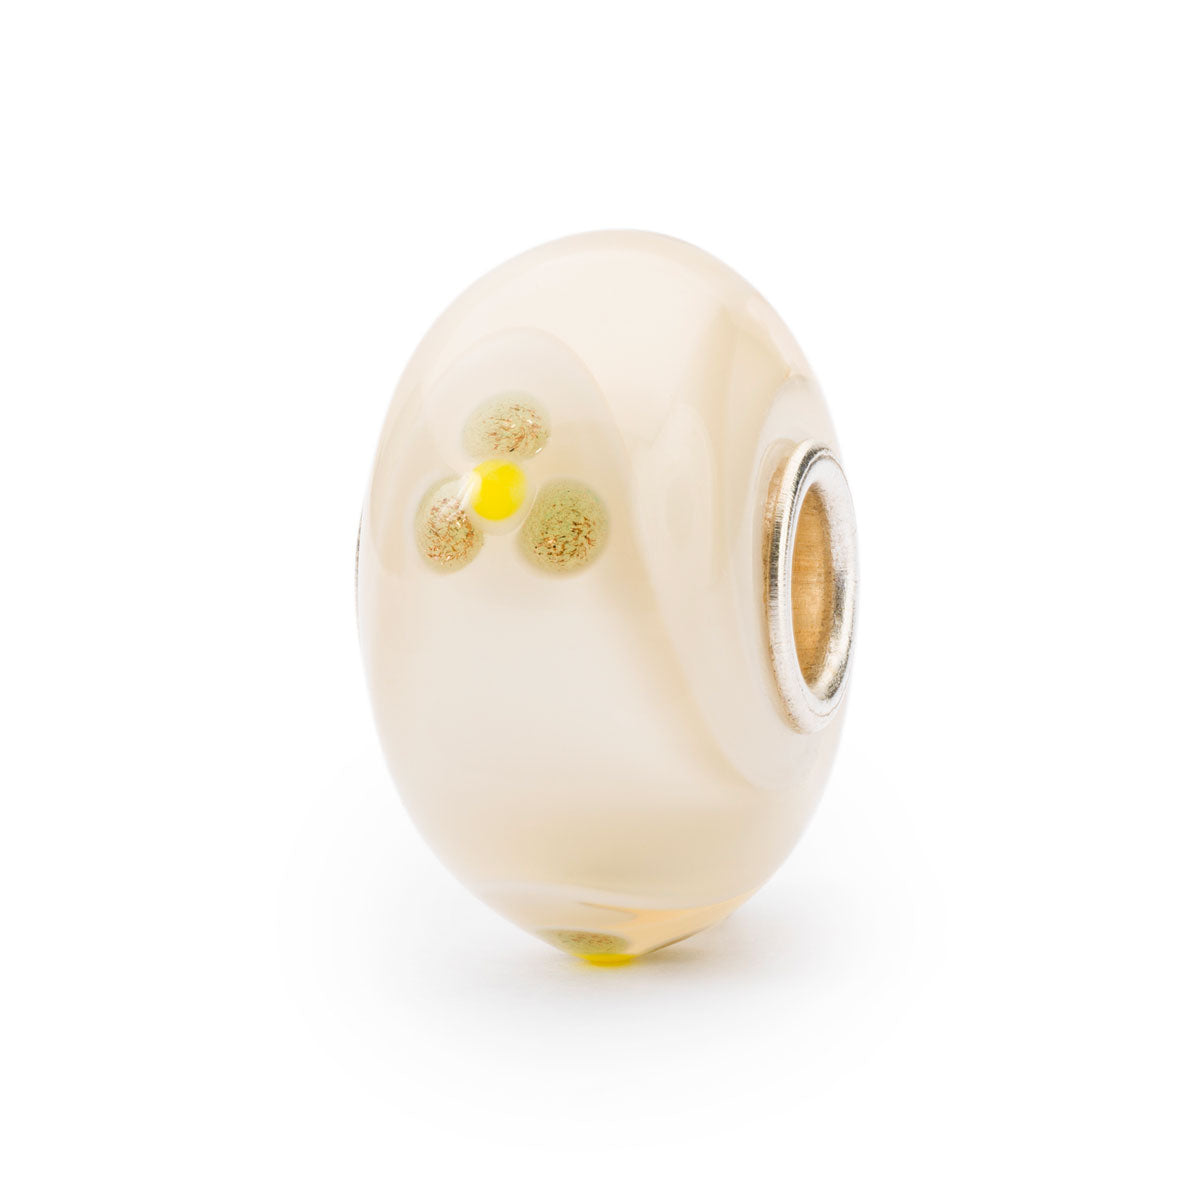 Trollbeads - Beads Armadillo dell'Equilibrio | TGLBE-20317